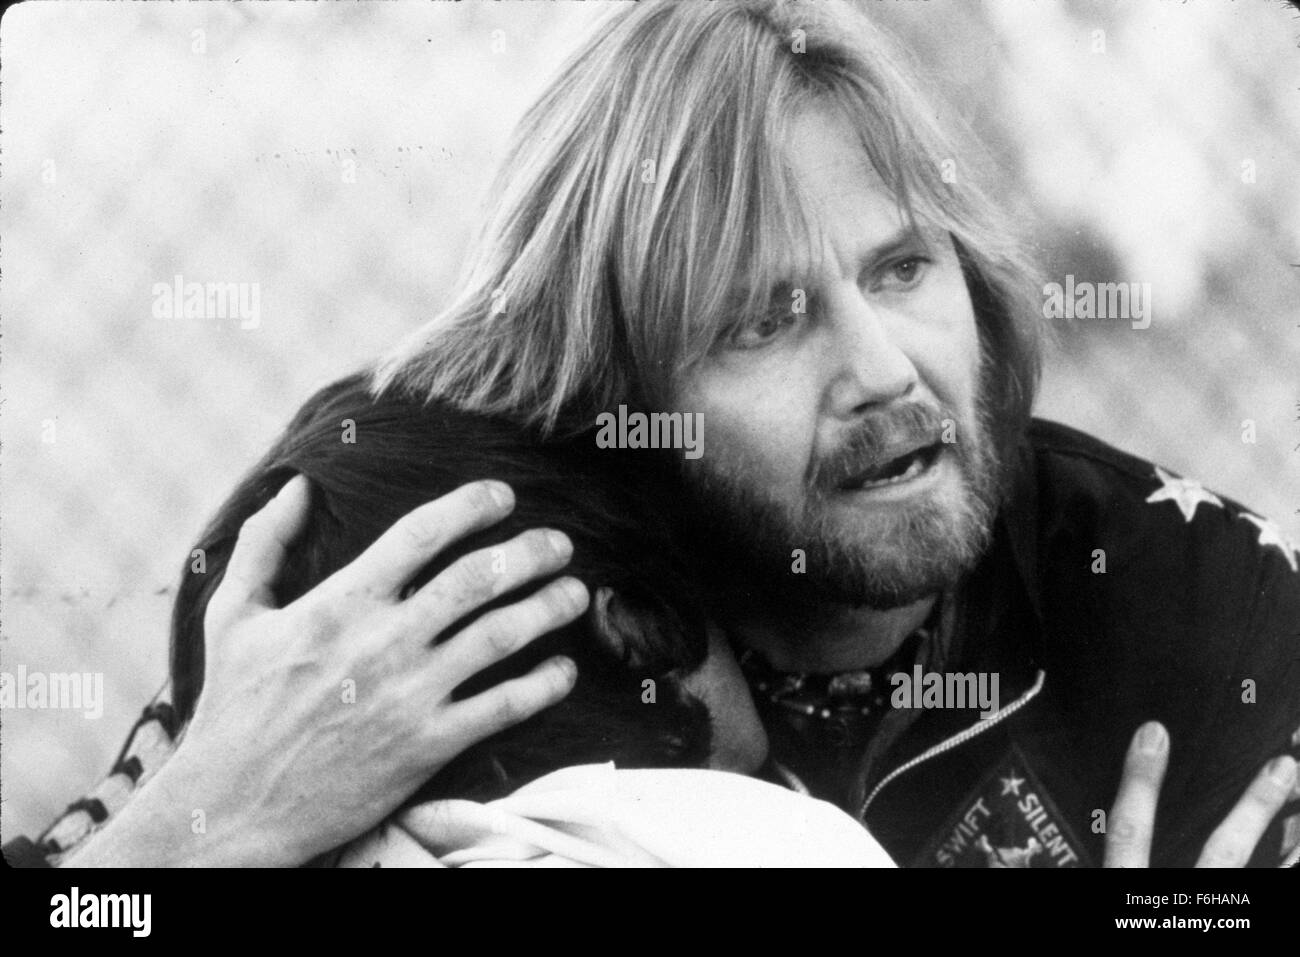 1978, Film Title: COMING HOME, Pictured: 1978, AWARDS - ACADEMY, BEST ACTOR, JON VOIGHT, BEARD, EMBRACE, UPSET, CONSOLING, OSCAR RETRO. (Credit Image: SNAP) (Credit Image: c SNAP/Entertainment Pictures) Stock Photo